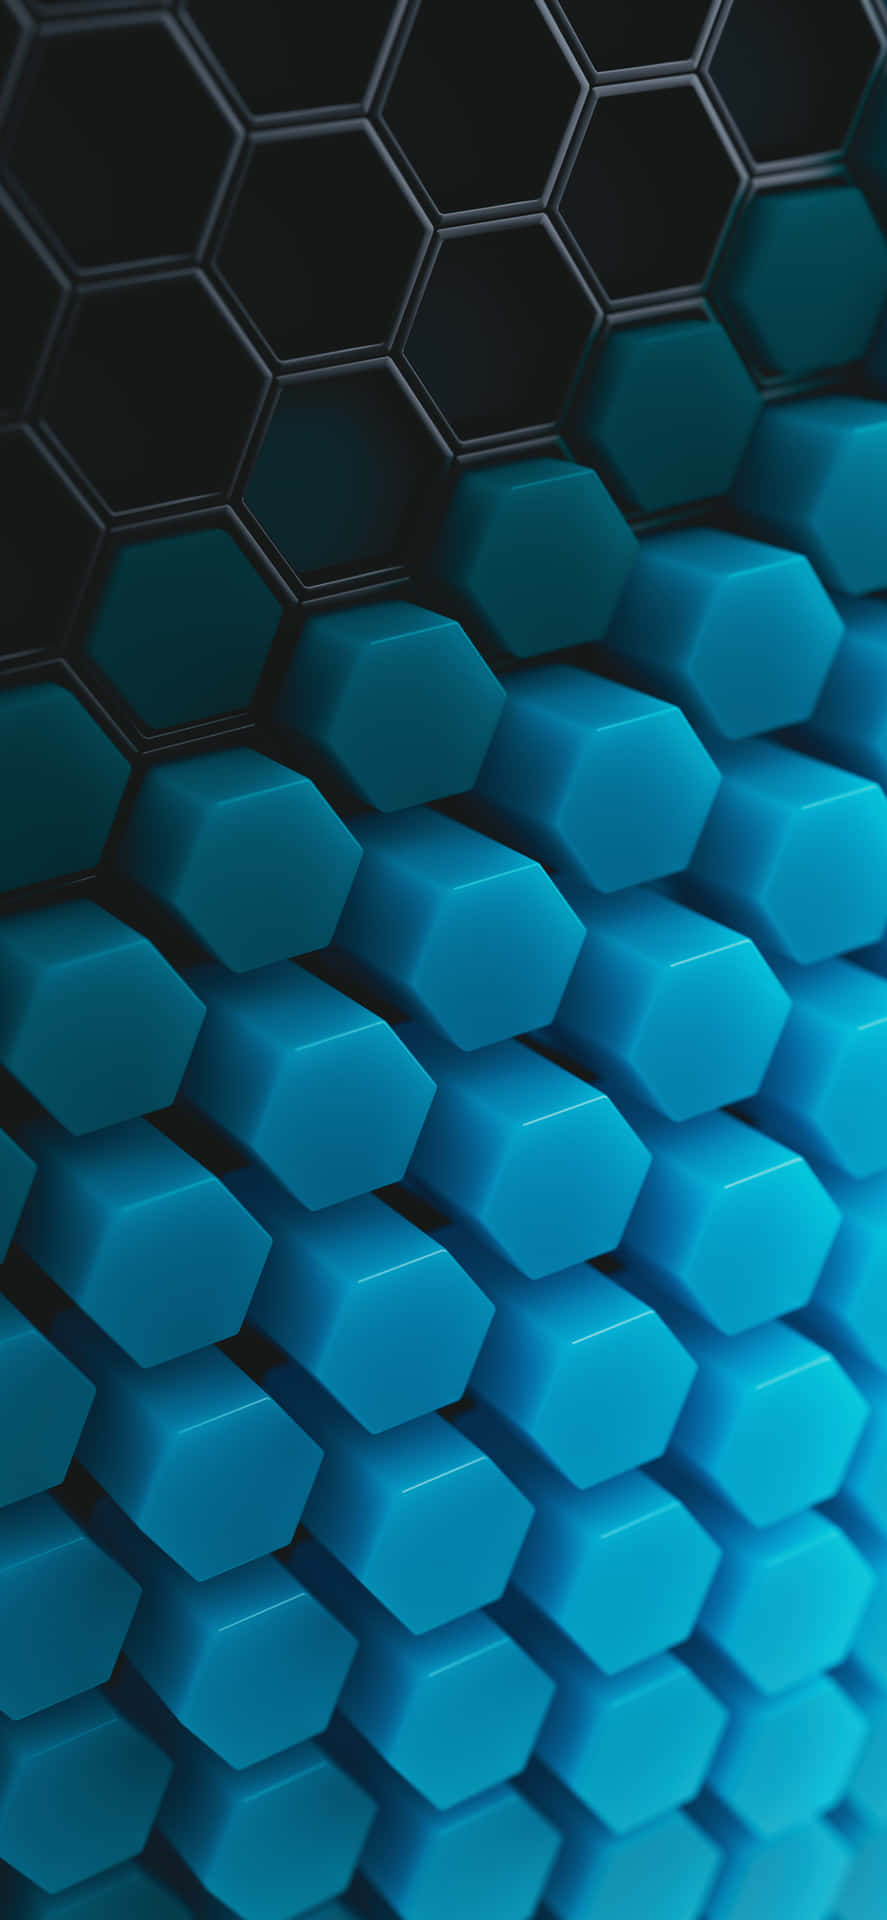 Embrace Technology With Geometric Iphone Wallpaper